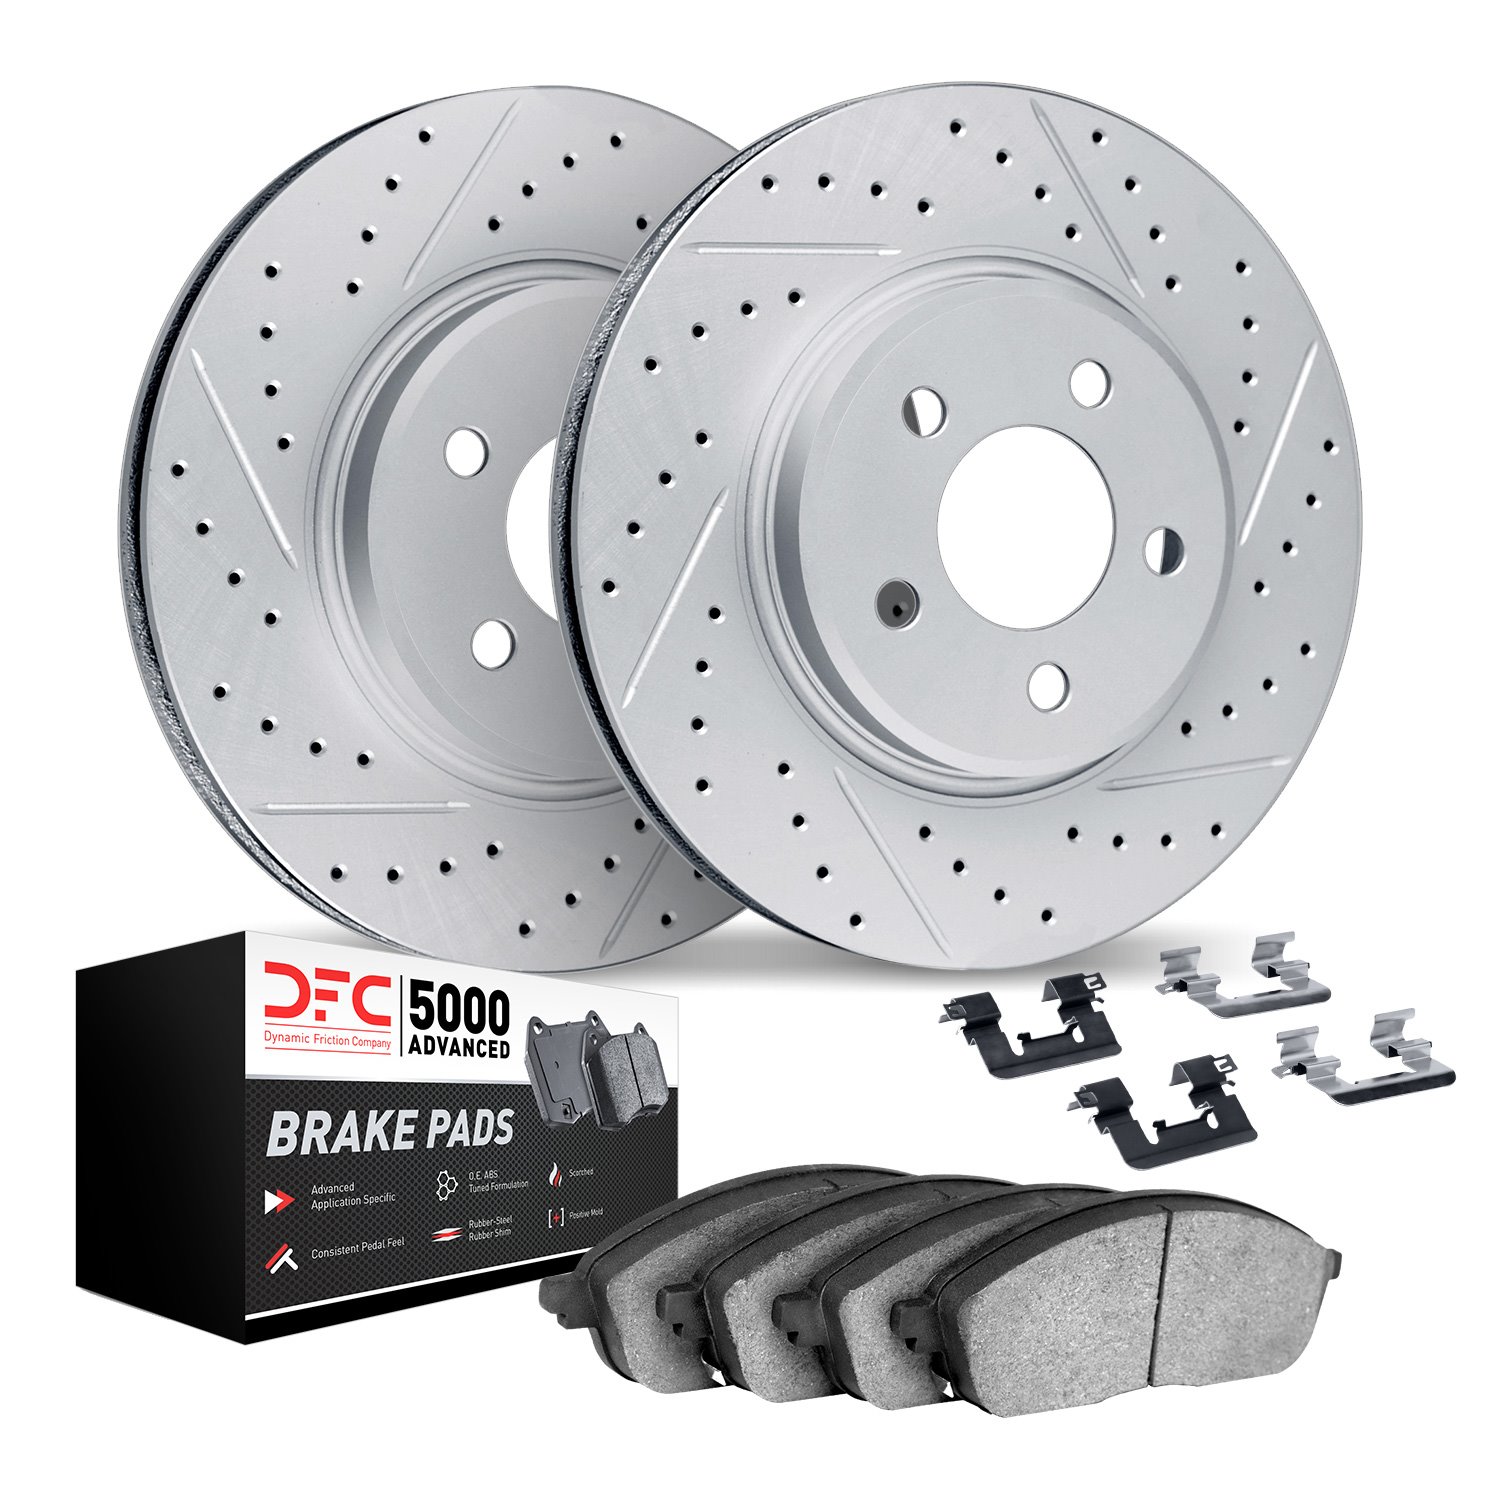 2512-59050 Geoperformance Drilled/Slotted Rotors w/5000 Advanced Brake Pads Kit & Hardware, 1998-2002 Acura/Honda, Position: Fro